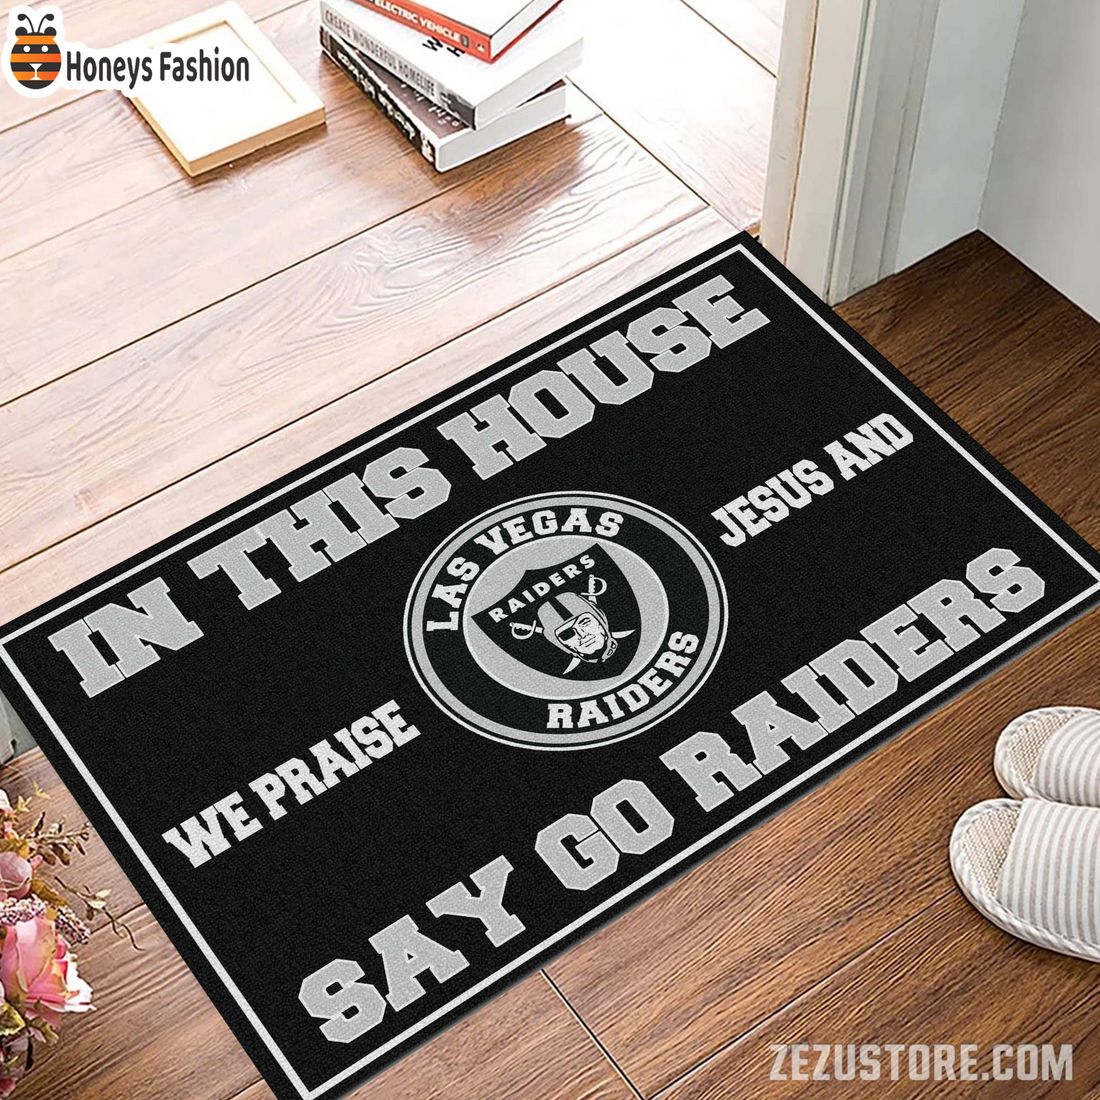 In this house we praise jesus and say go Raiders doormat